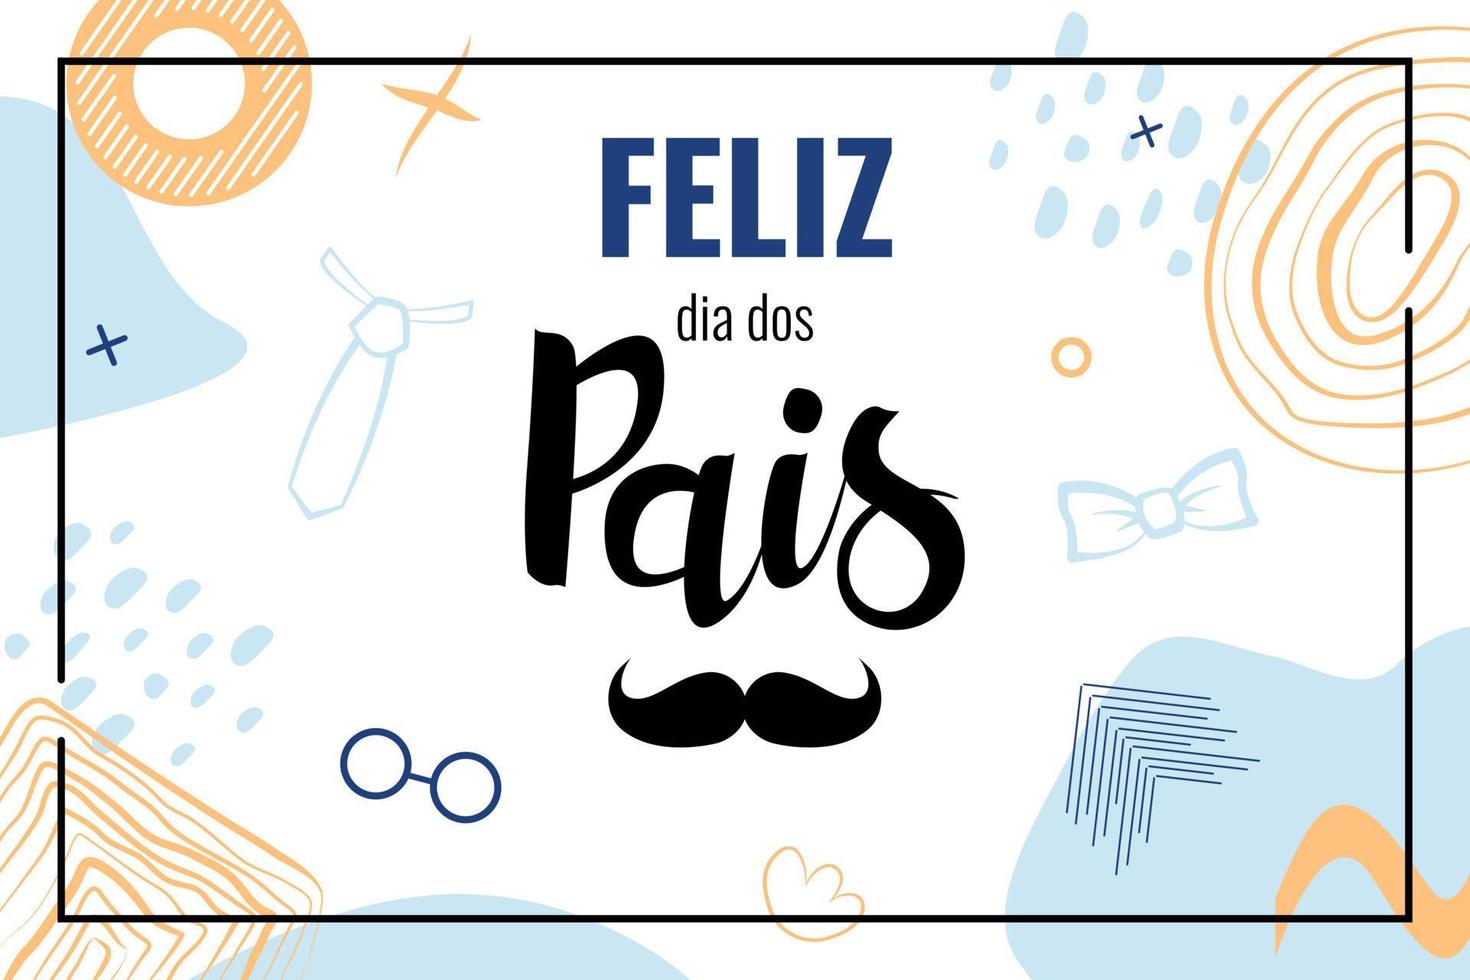 Feliz dia dos pais means Happy Father's Day in Brazil. Banner with lettering in portuguese language with mustache. Vector